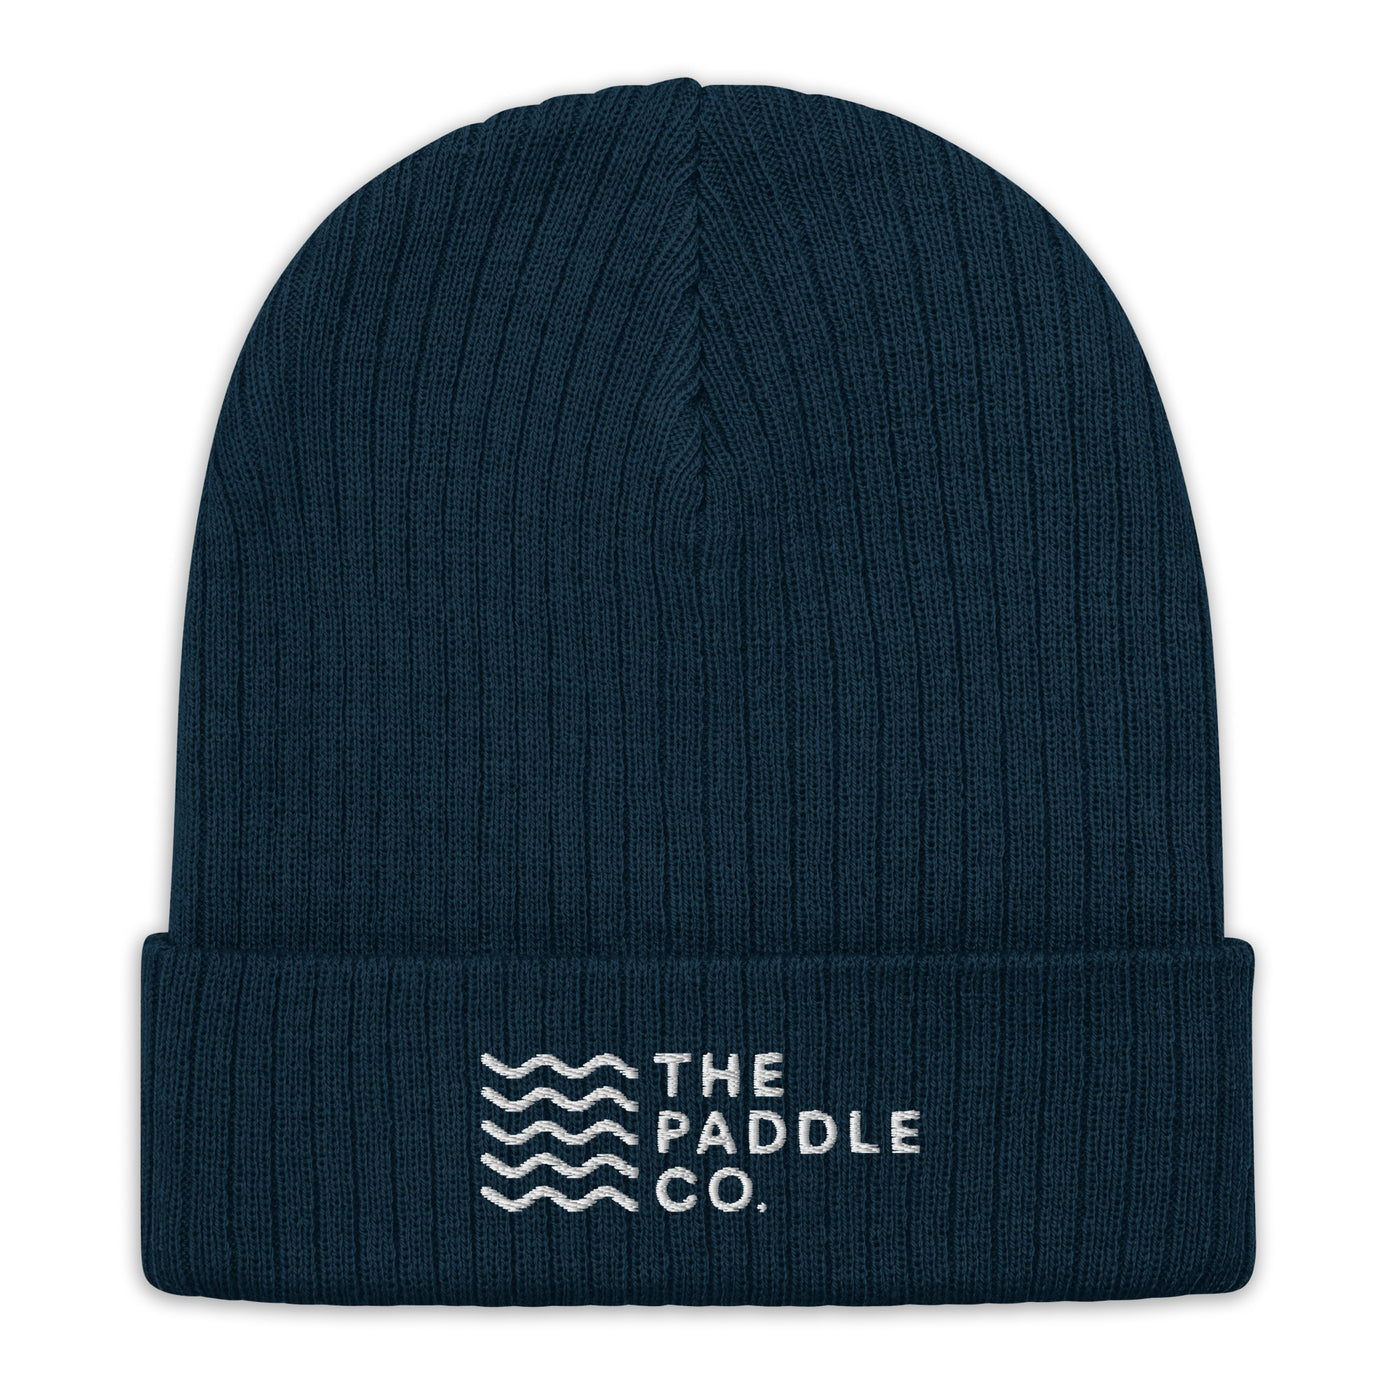 Paddle Co. Knit Beanie